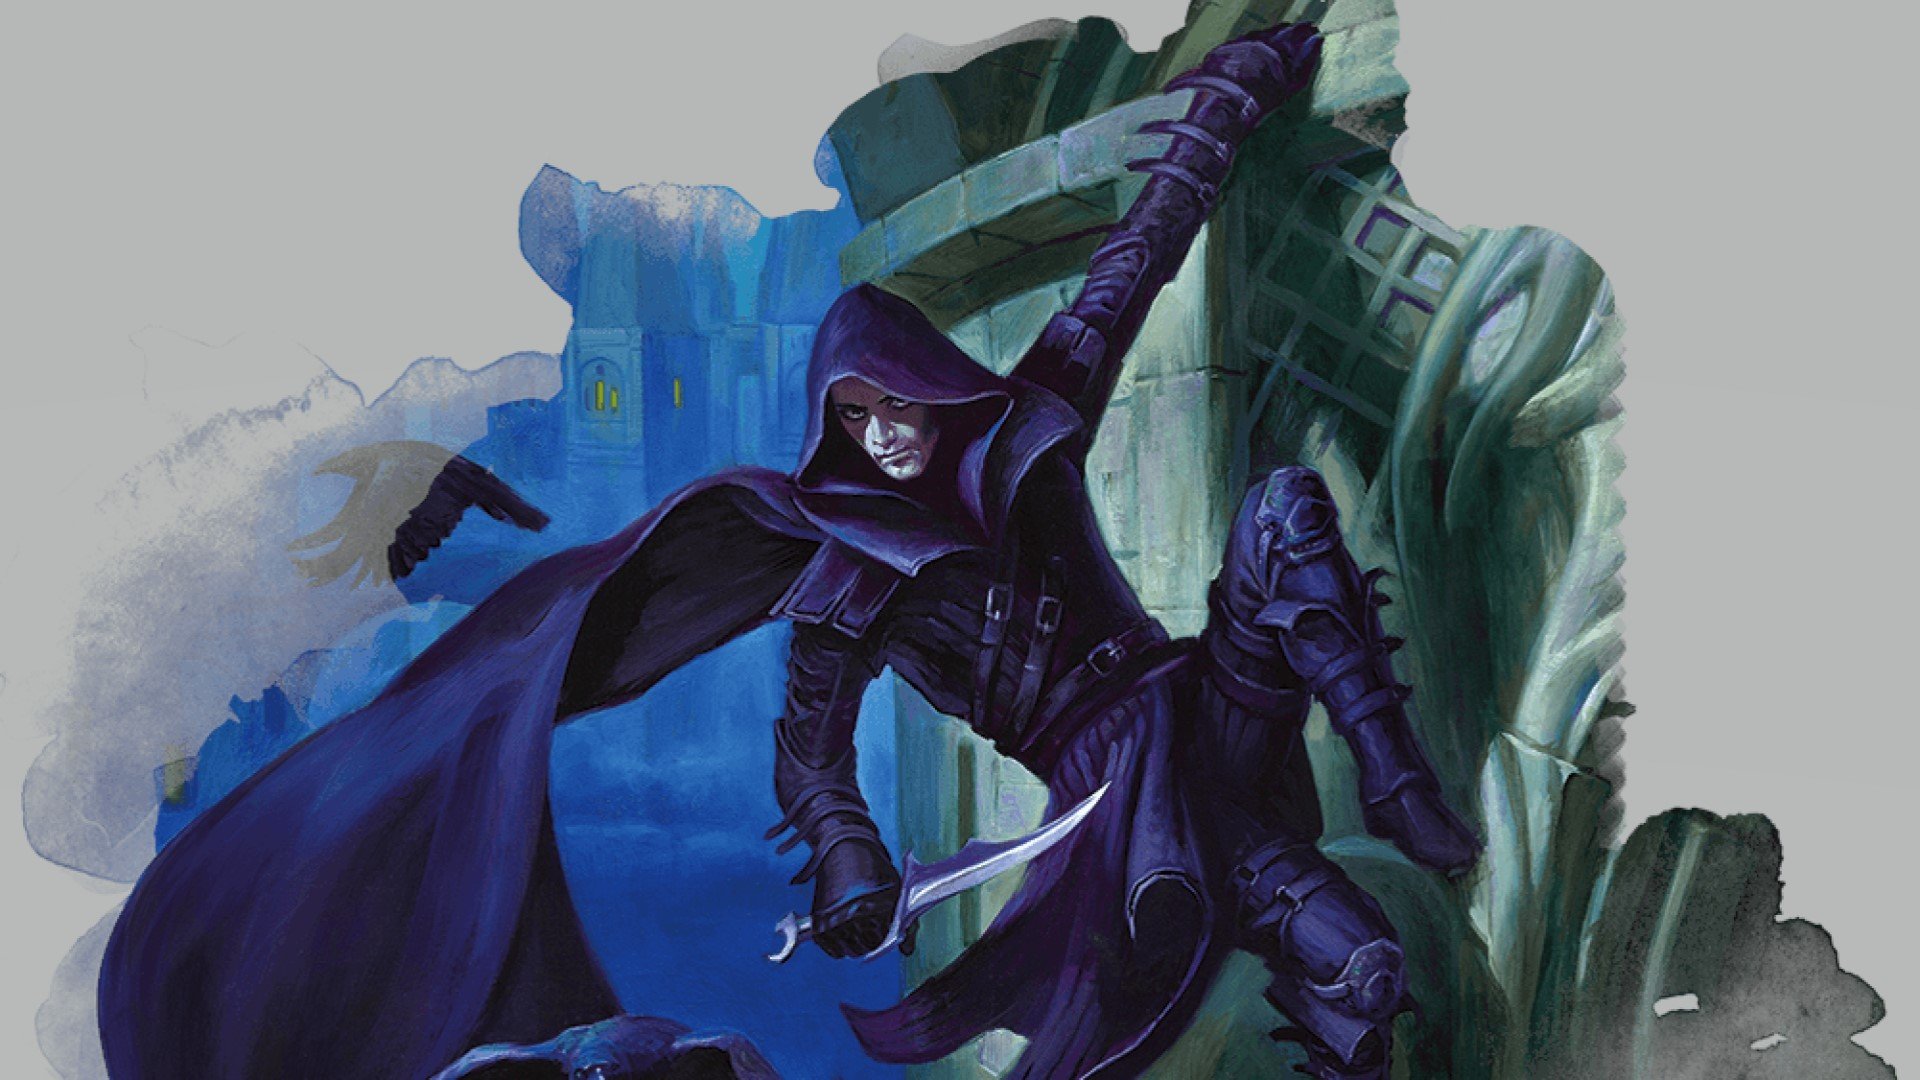 DnD Rogue 5e - Wizards of the Coast artwork showing a cloaked assassin hanging off a castle wall